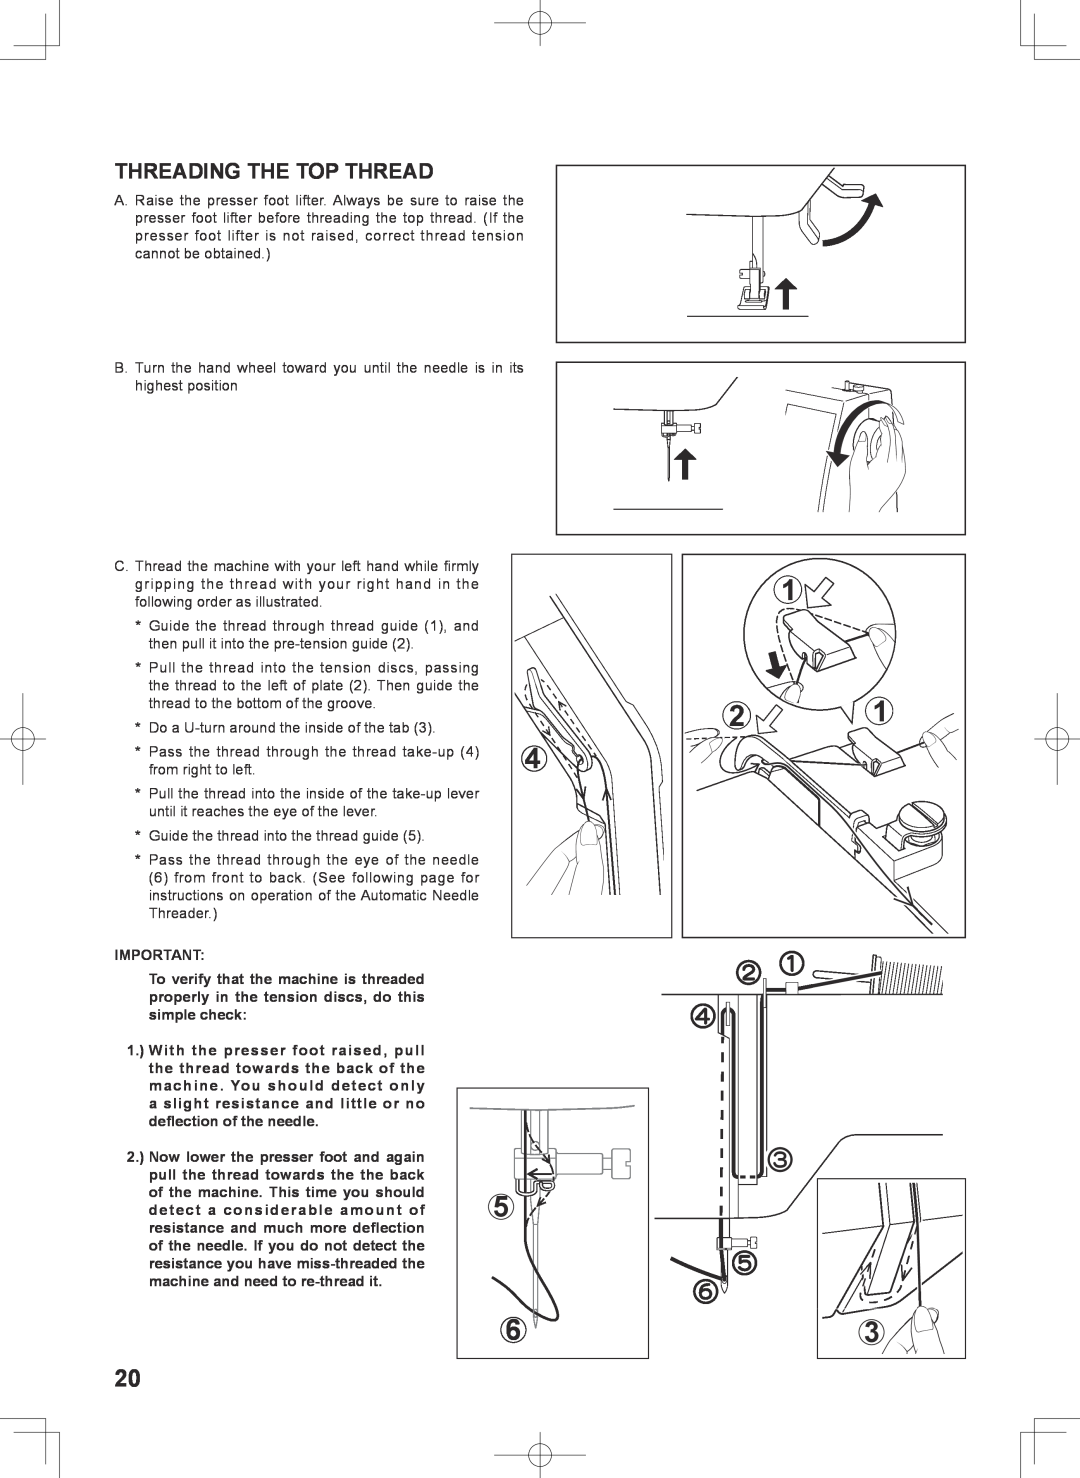 Singer 7467S instruction manual Threading The Top Thread 